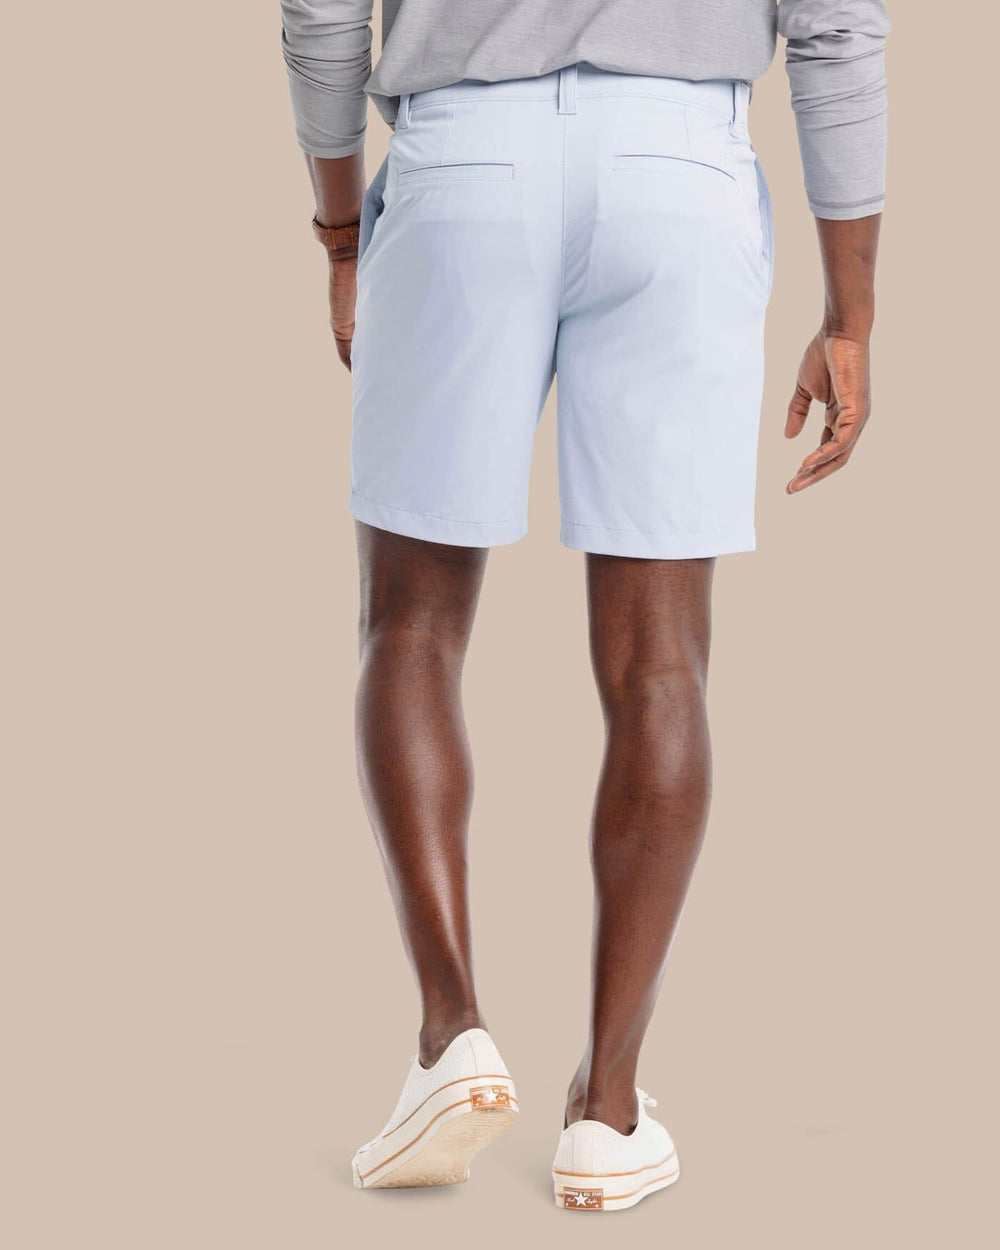 The back view of the Southern Tide gulf 8 inch brrr die performance short by Southern Tide - Fog